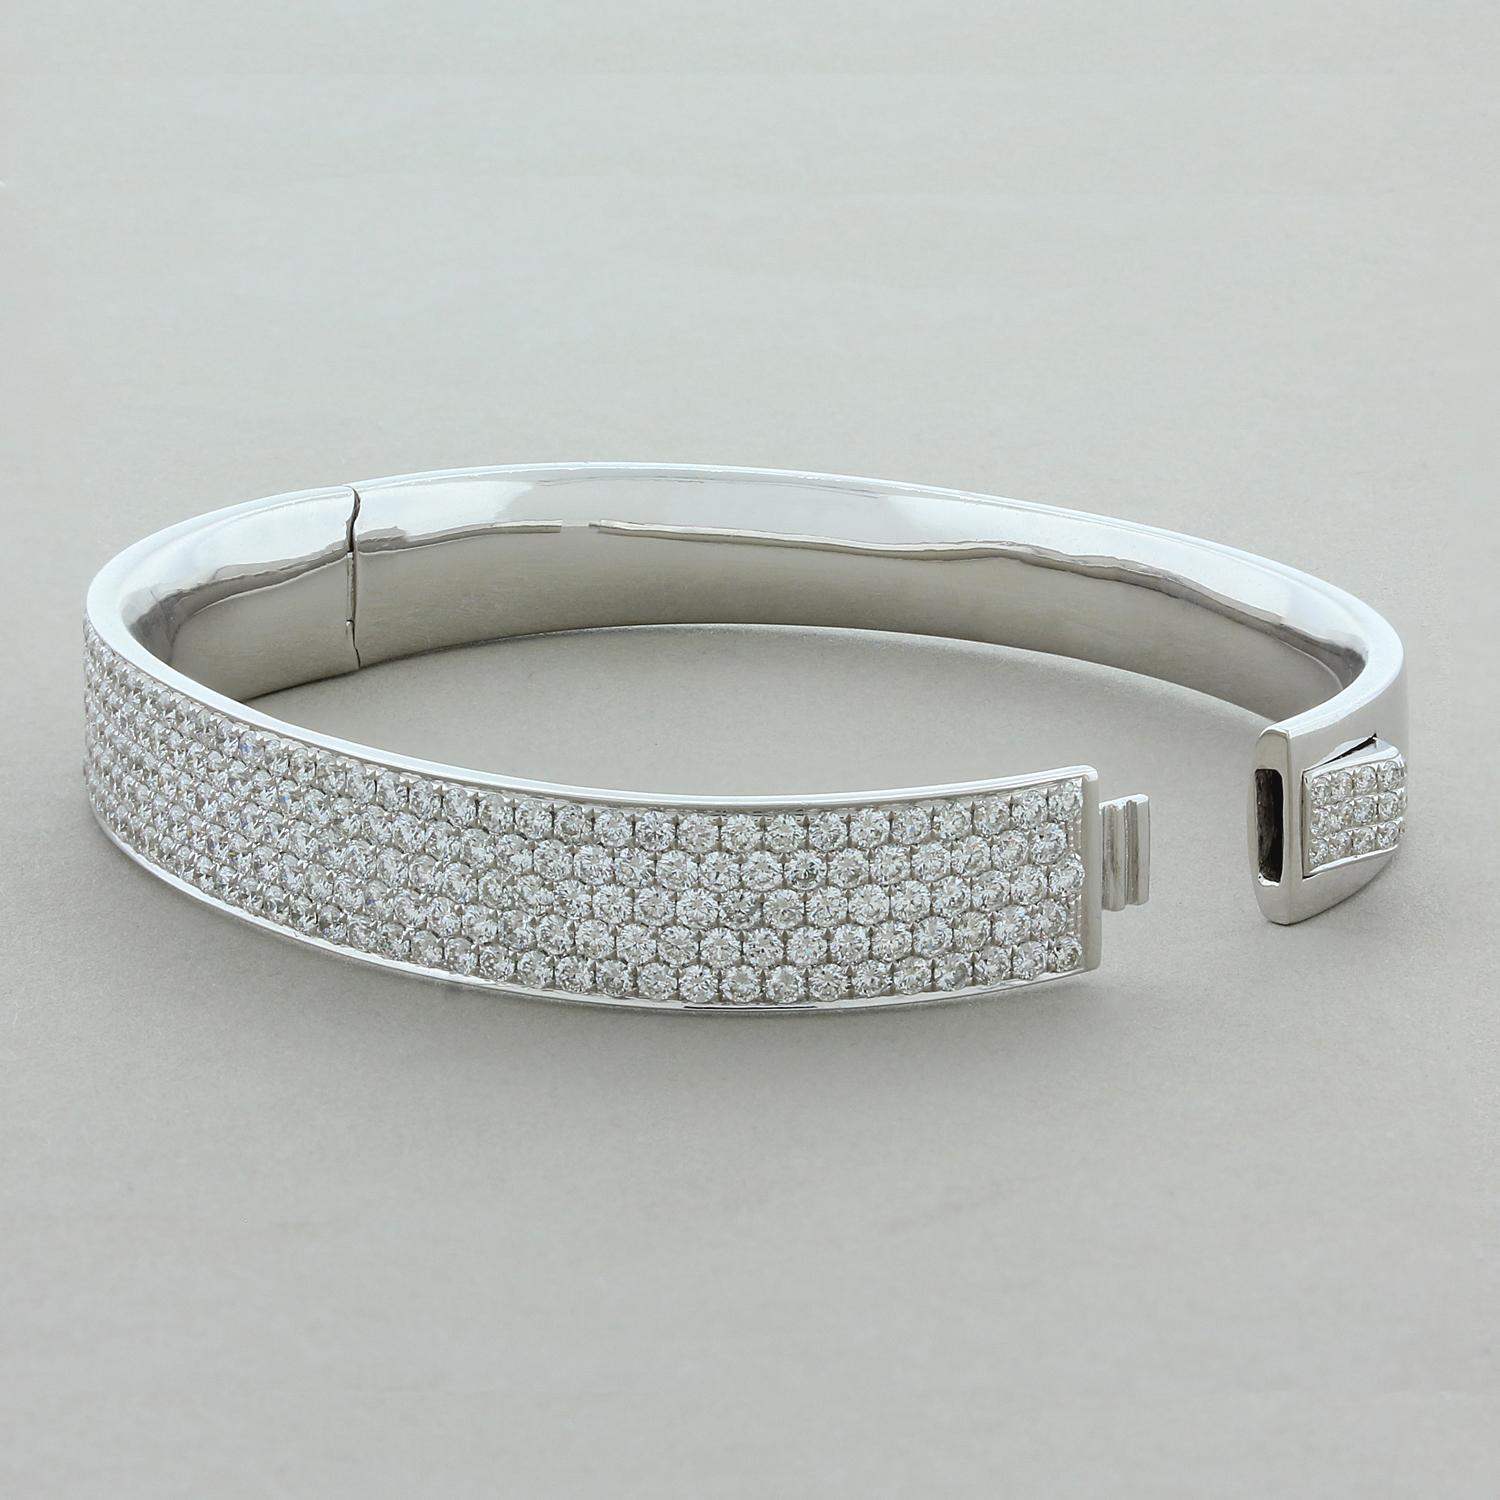 This elegant hard bracelet features 5.69 carats of sparkling round brilliant cut diamonds that are delicately pave set in 18K white gold. The diamonds blanket the front half of this oval shaped bracelet. The lock carries the same pave set diamonds